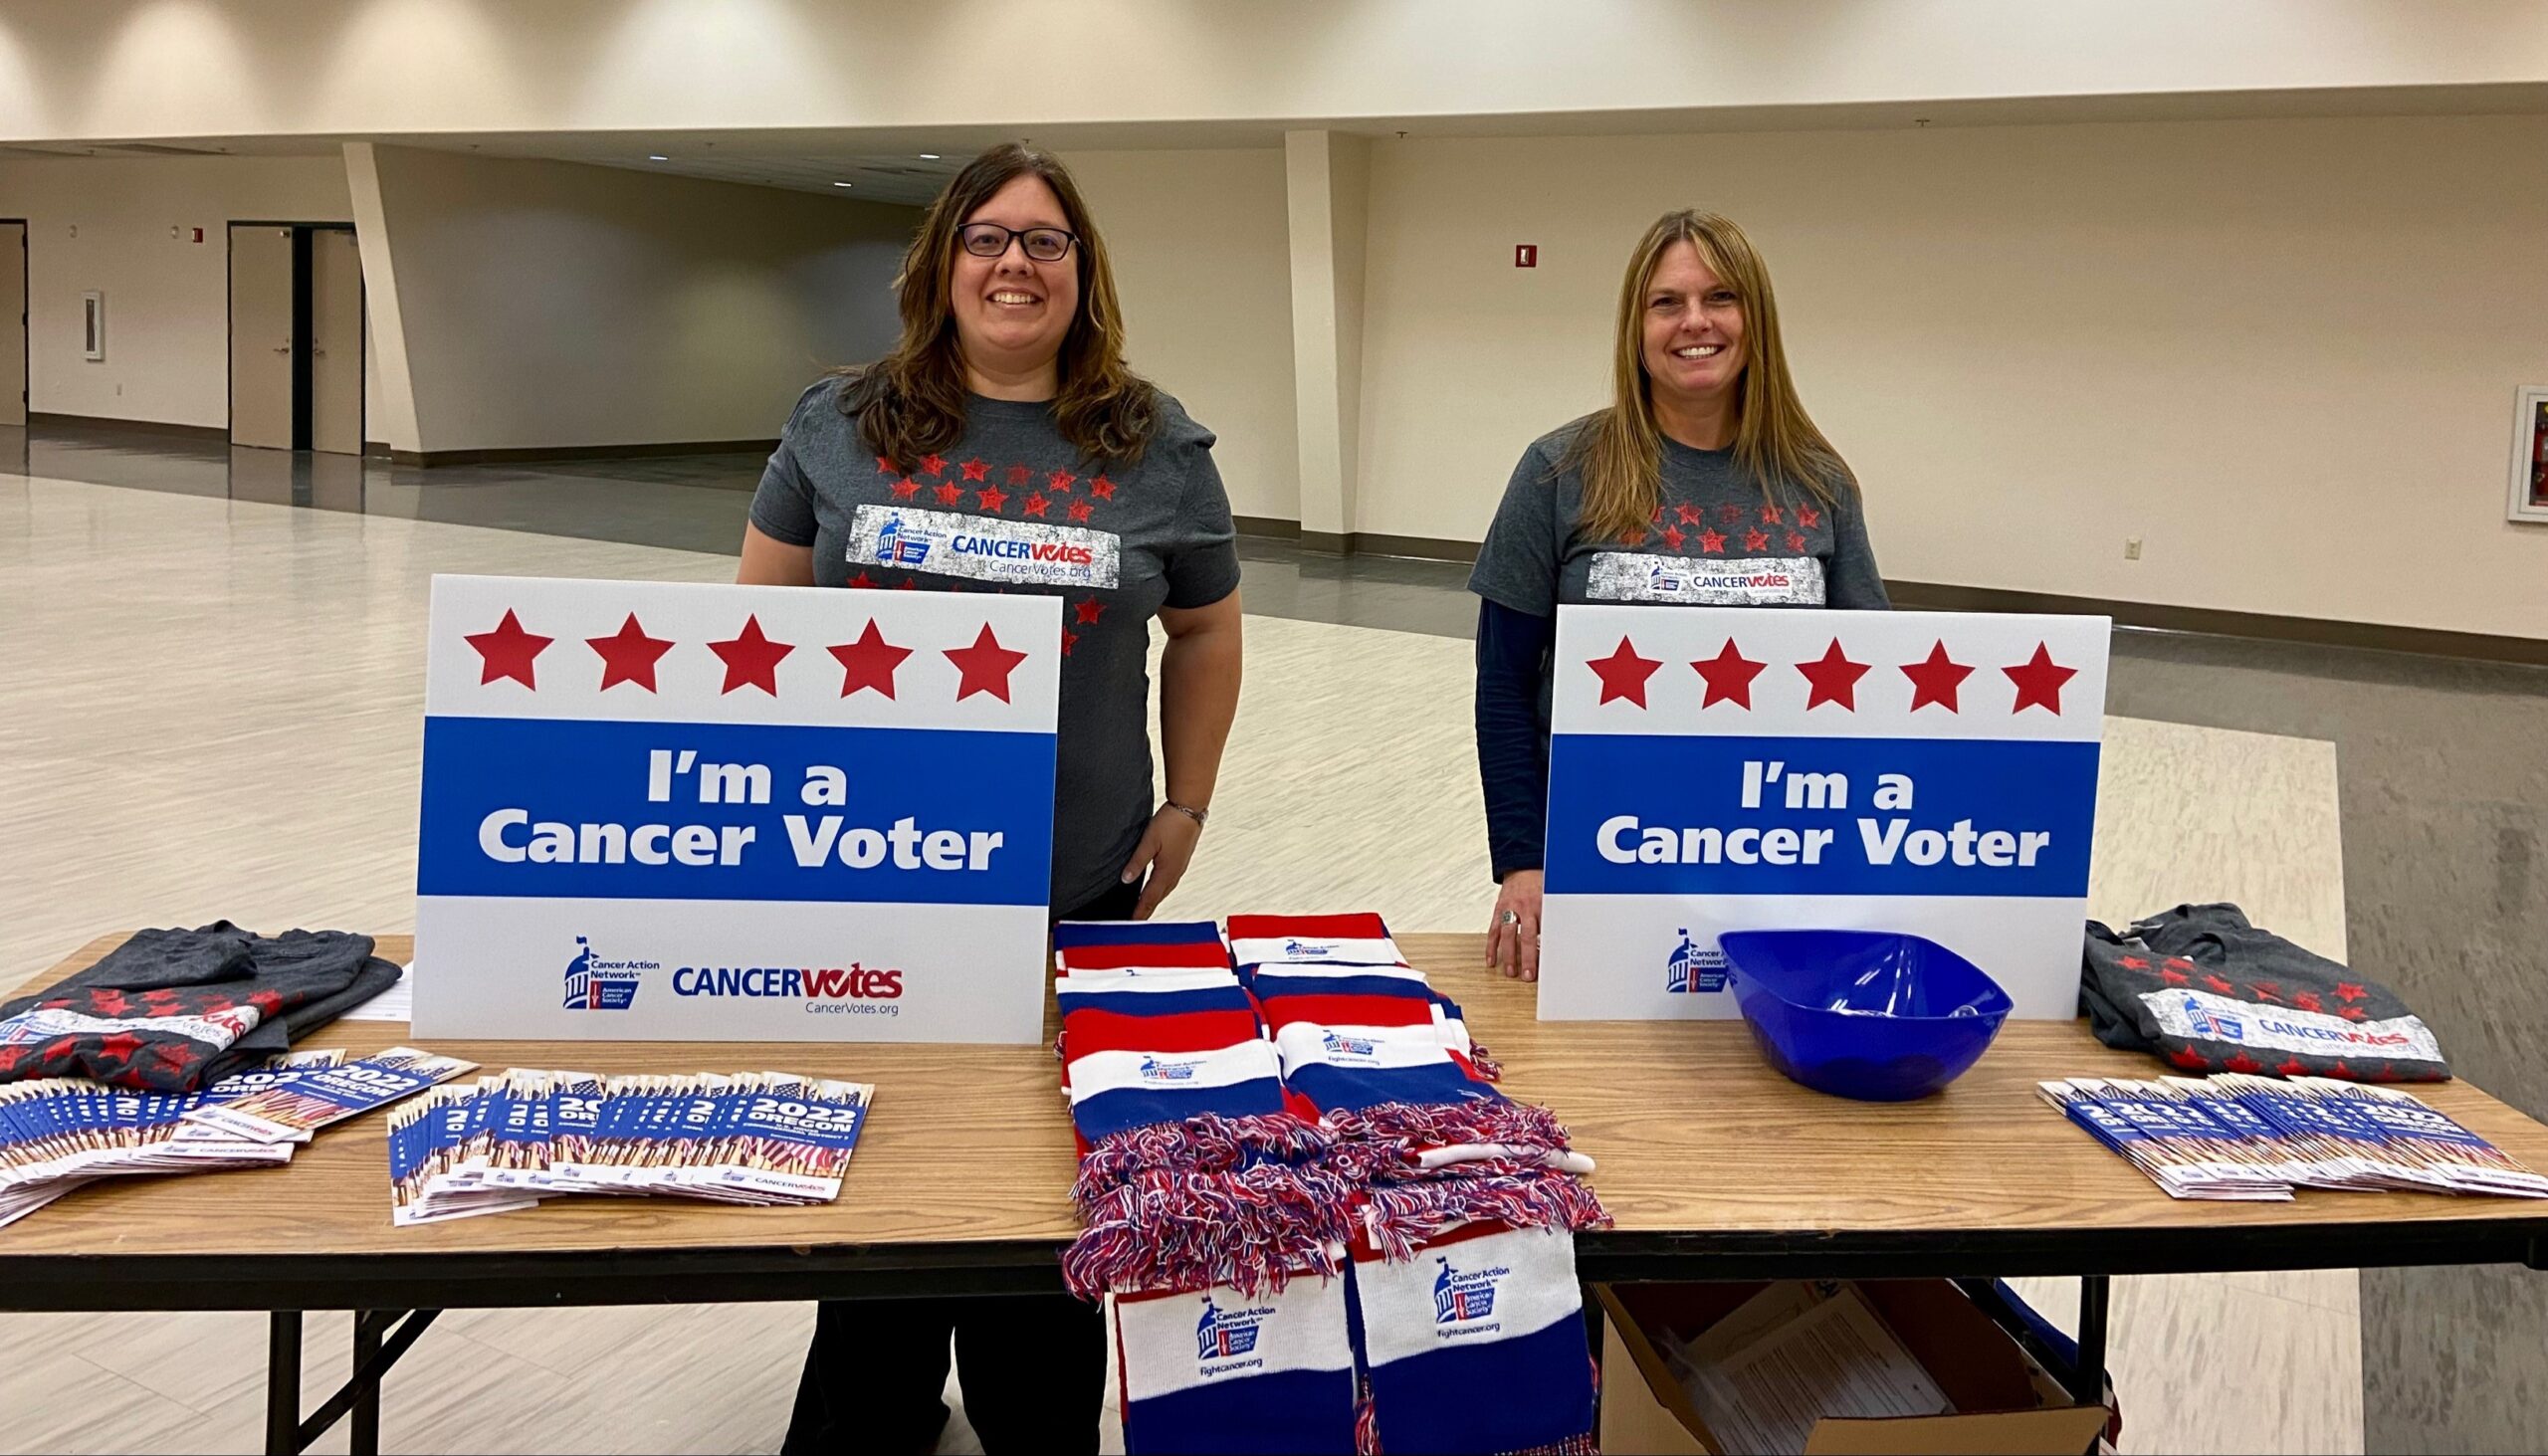 ACS CAN volunteers tabling at Cancer Vote event